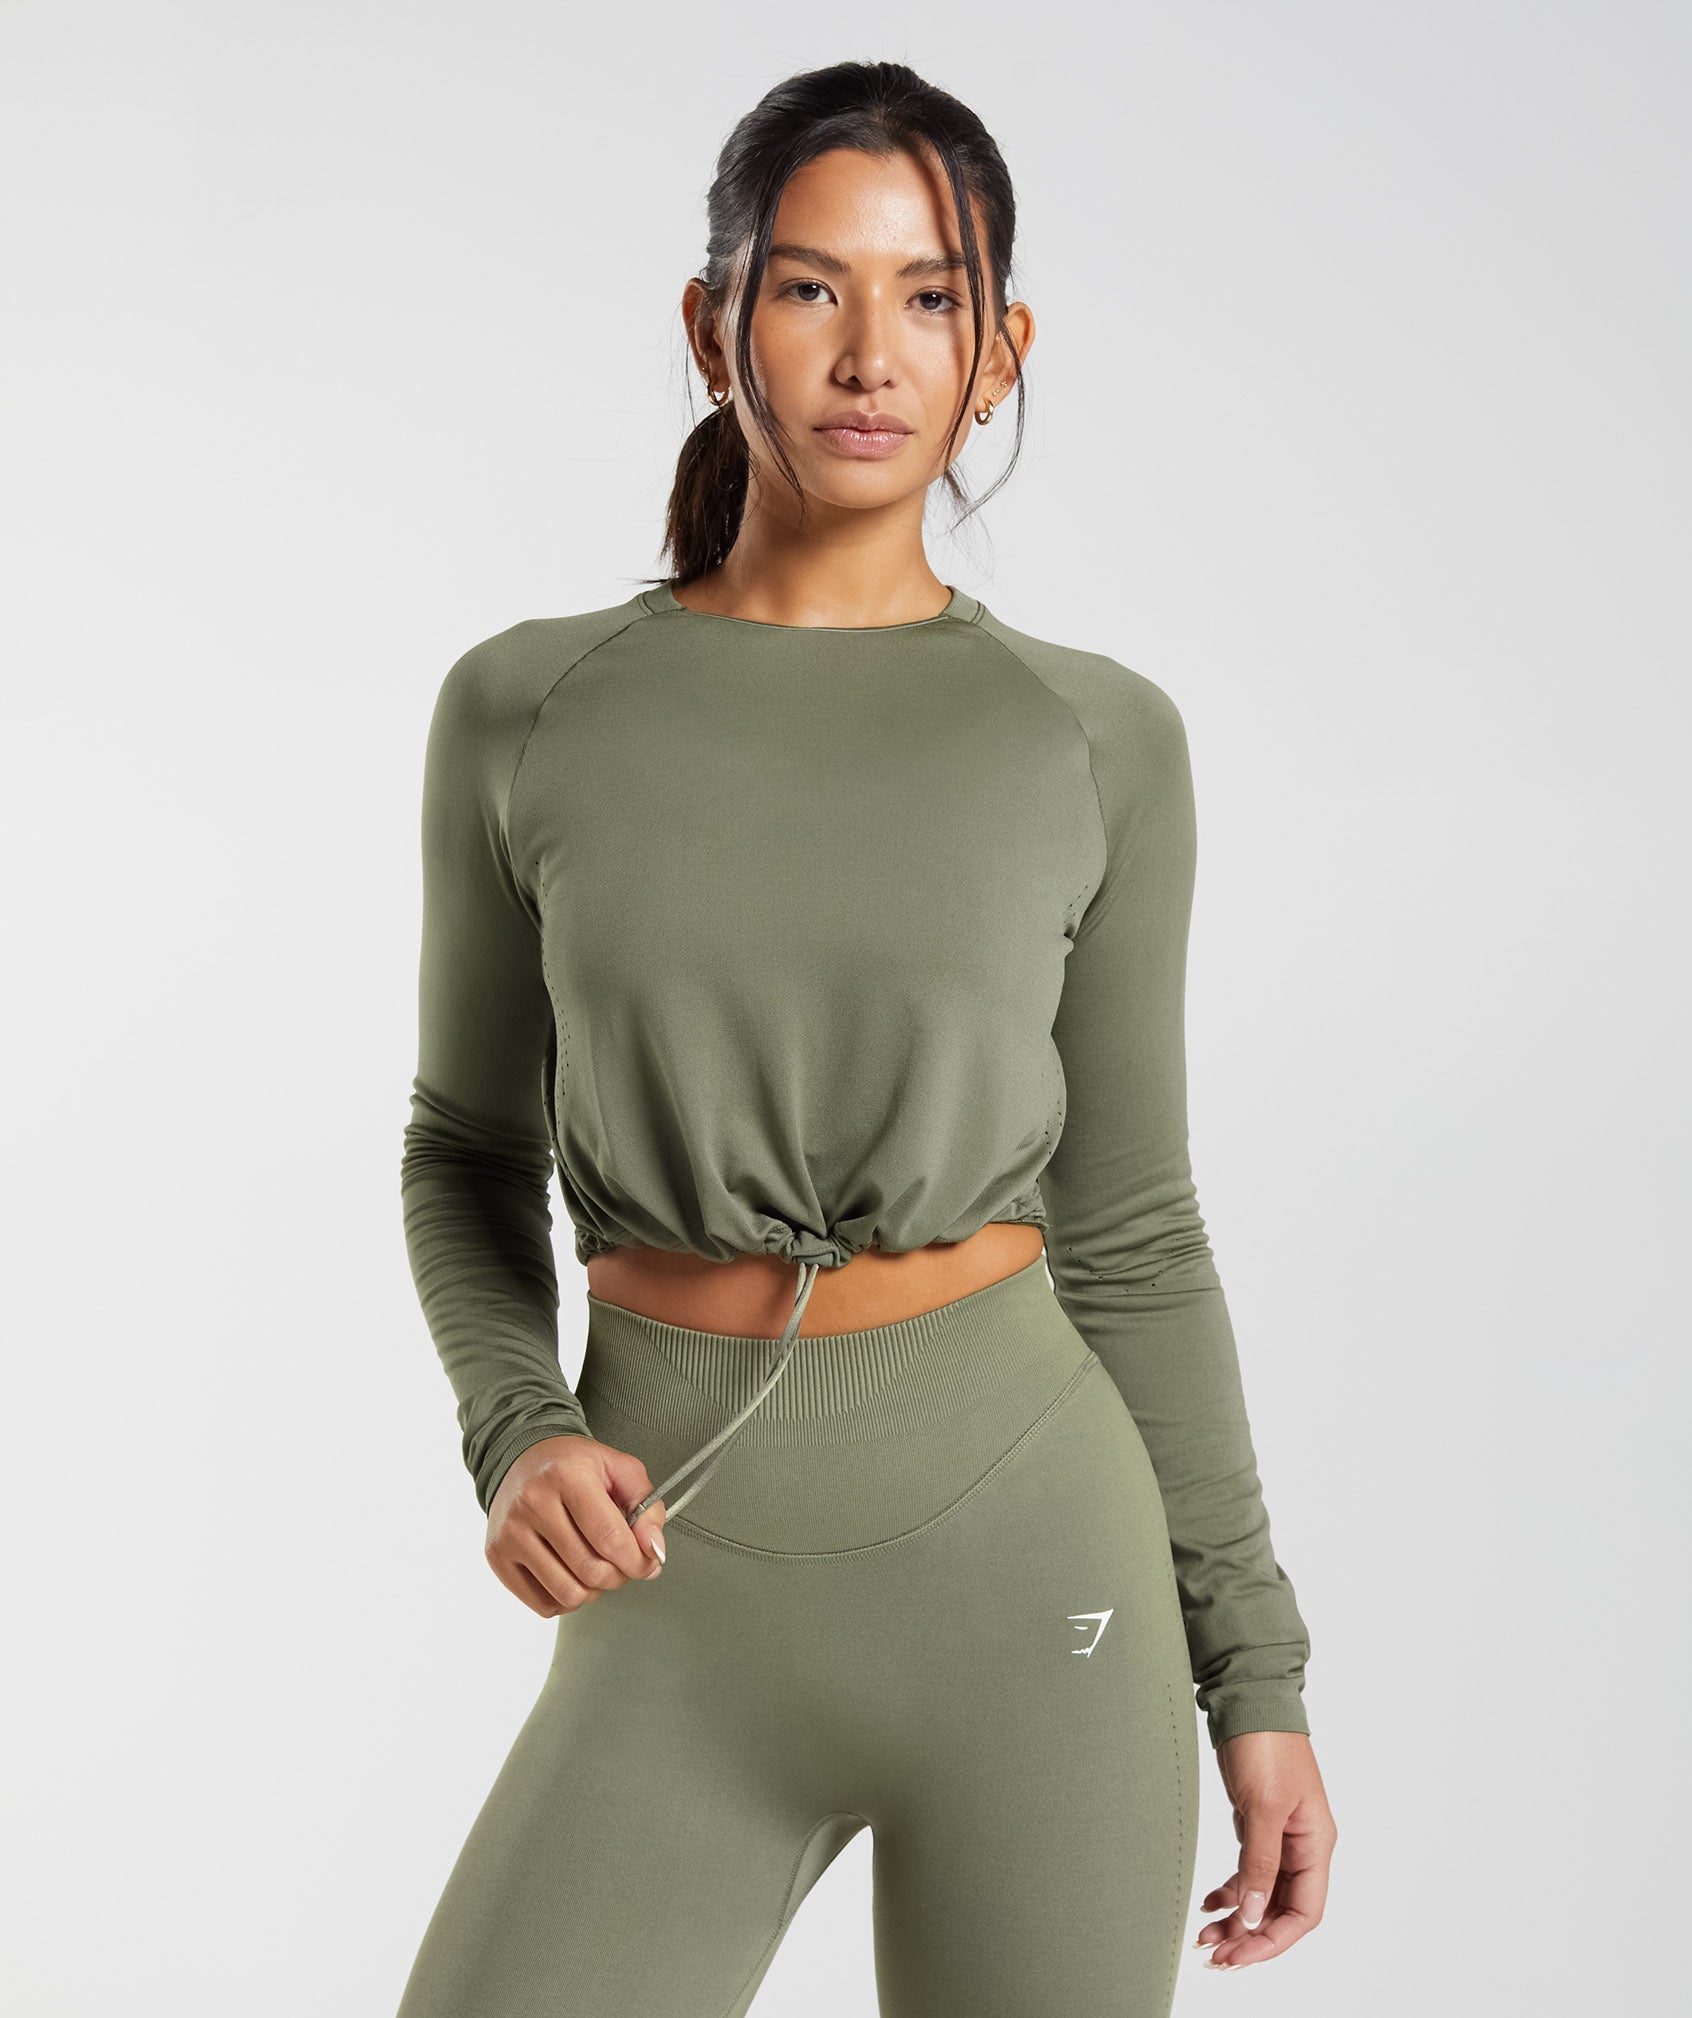 Sweat Seamless Long Sleeve Crop Top in Dusty Olive - view 5